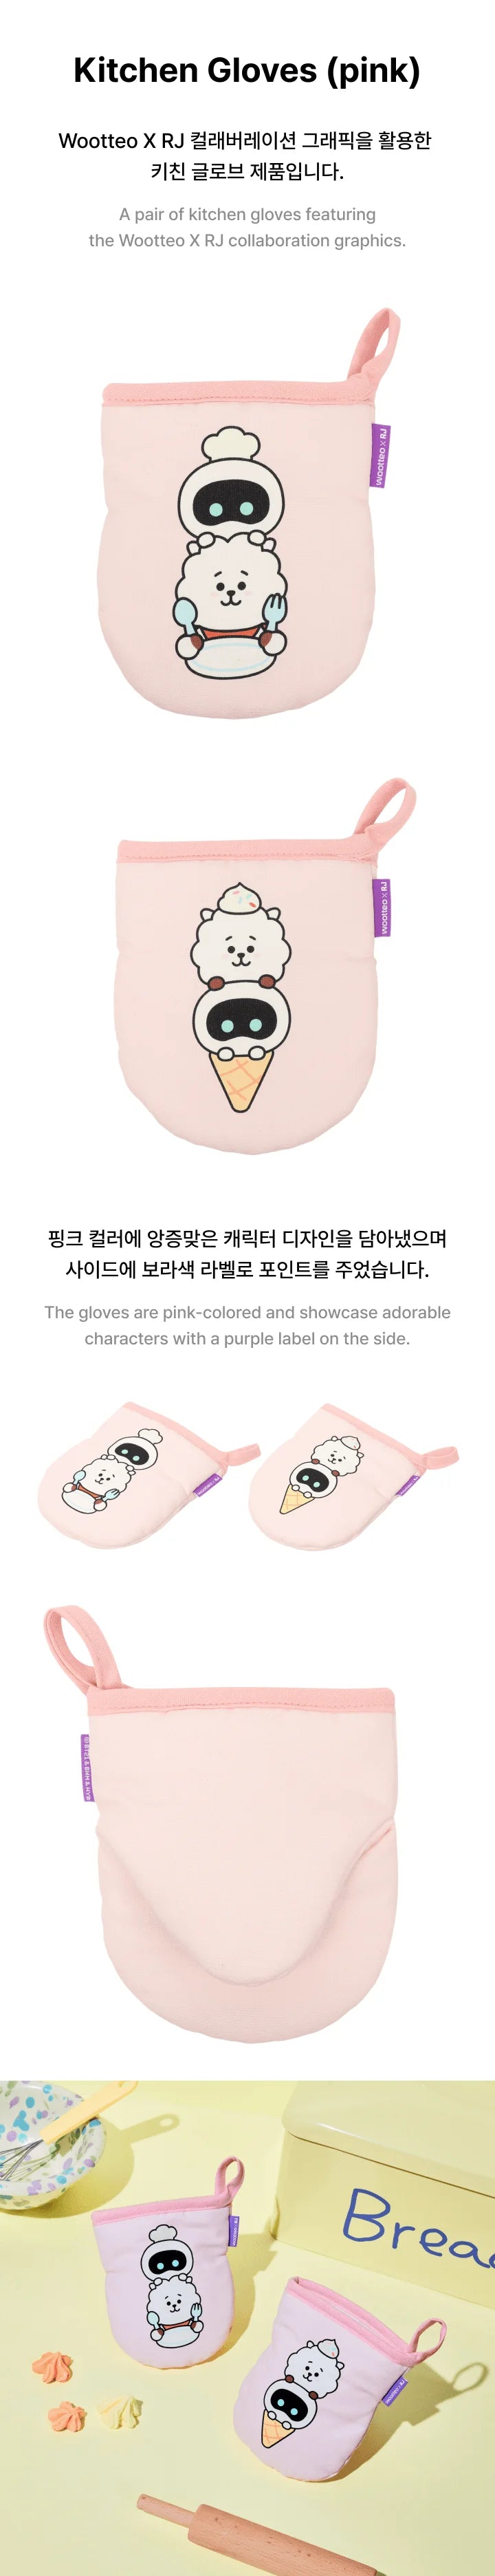 [PRE ORDER] WOOTEO X RJ Collaboration (Official MD) / KITCHEN GLOVES